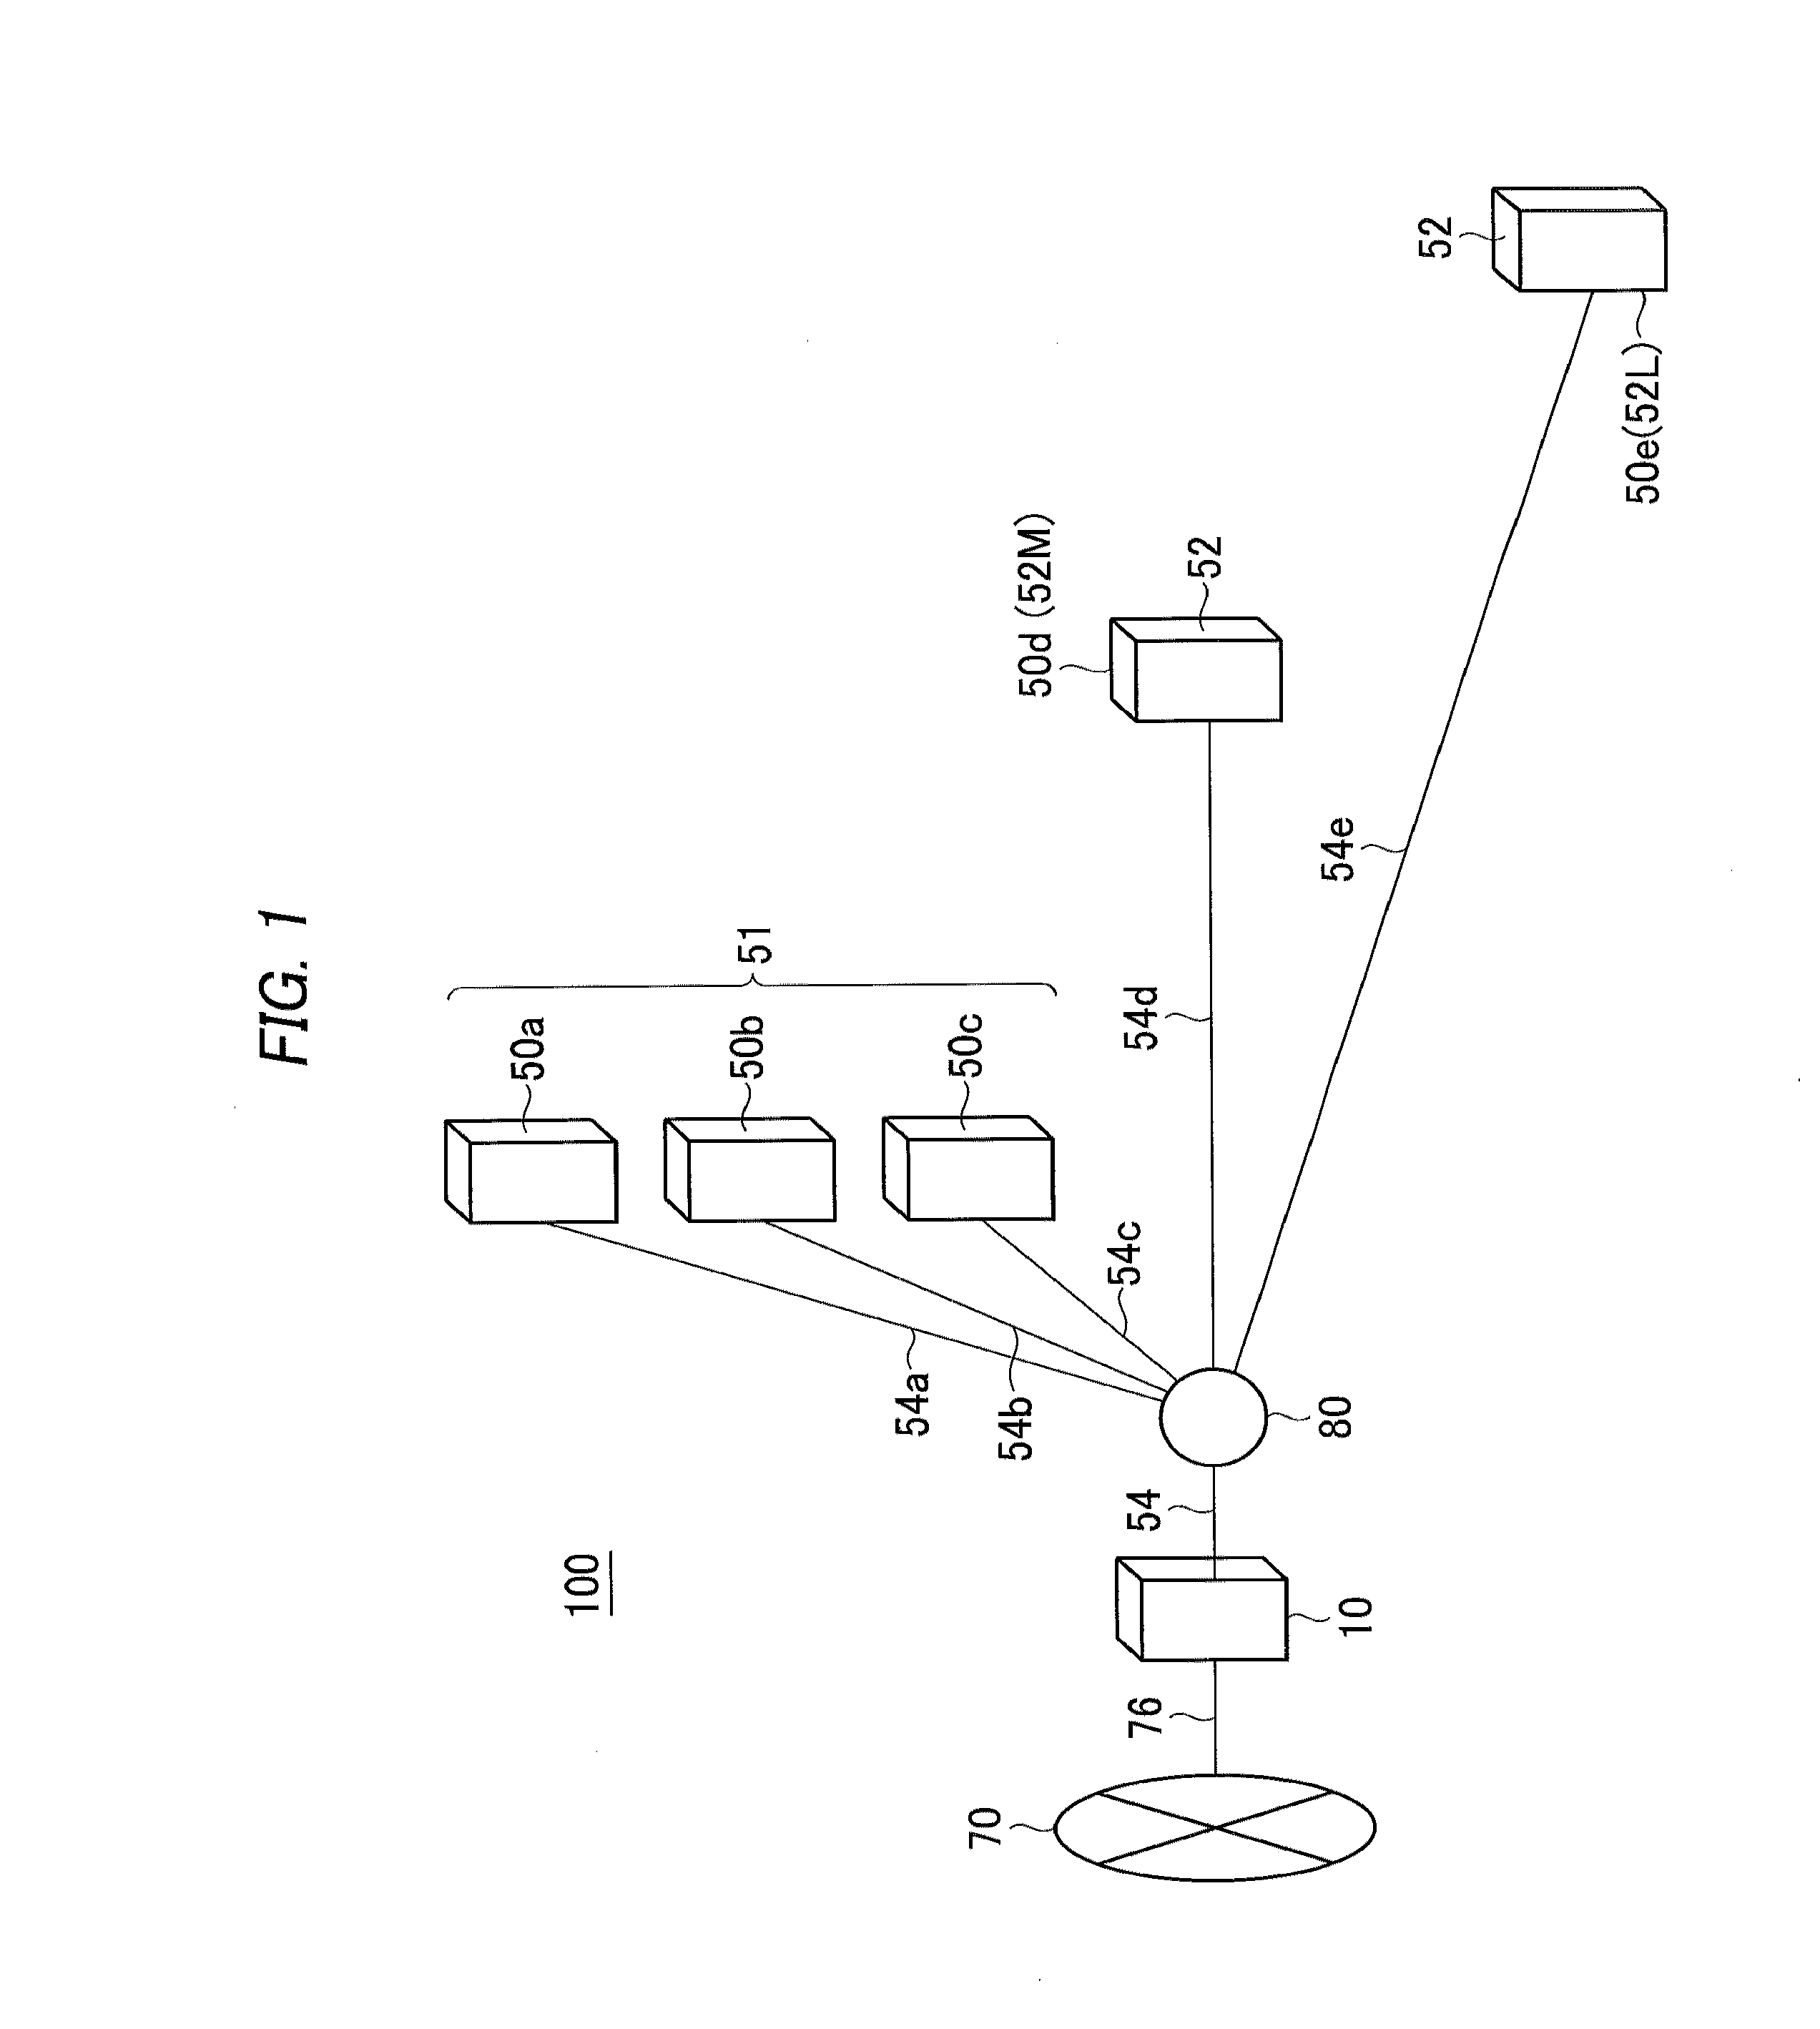 Dynamic bandwidth allocating control apparatus with bandwidth usability improved